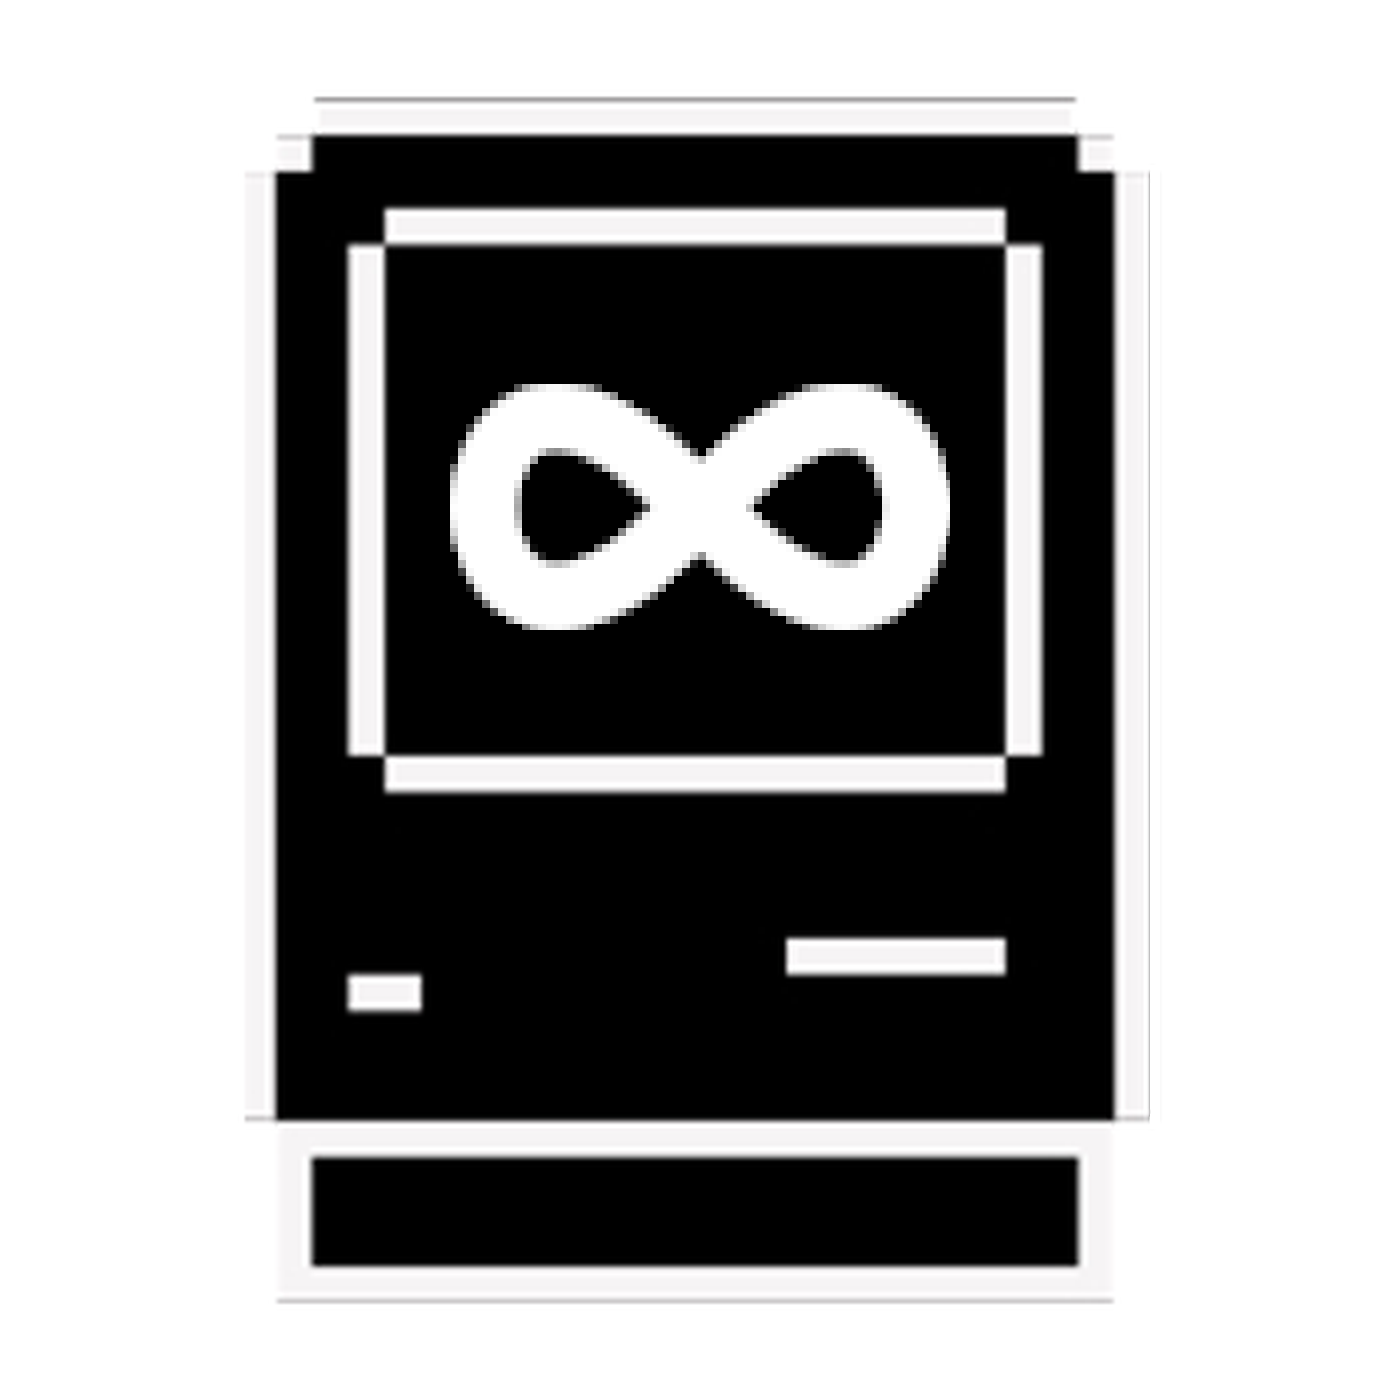 A black computer icon with an infinity symbol on its screen.